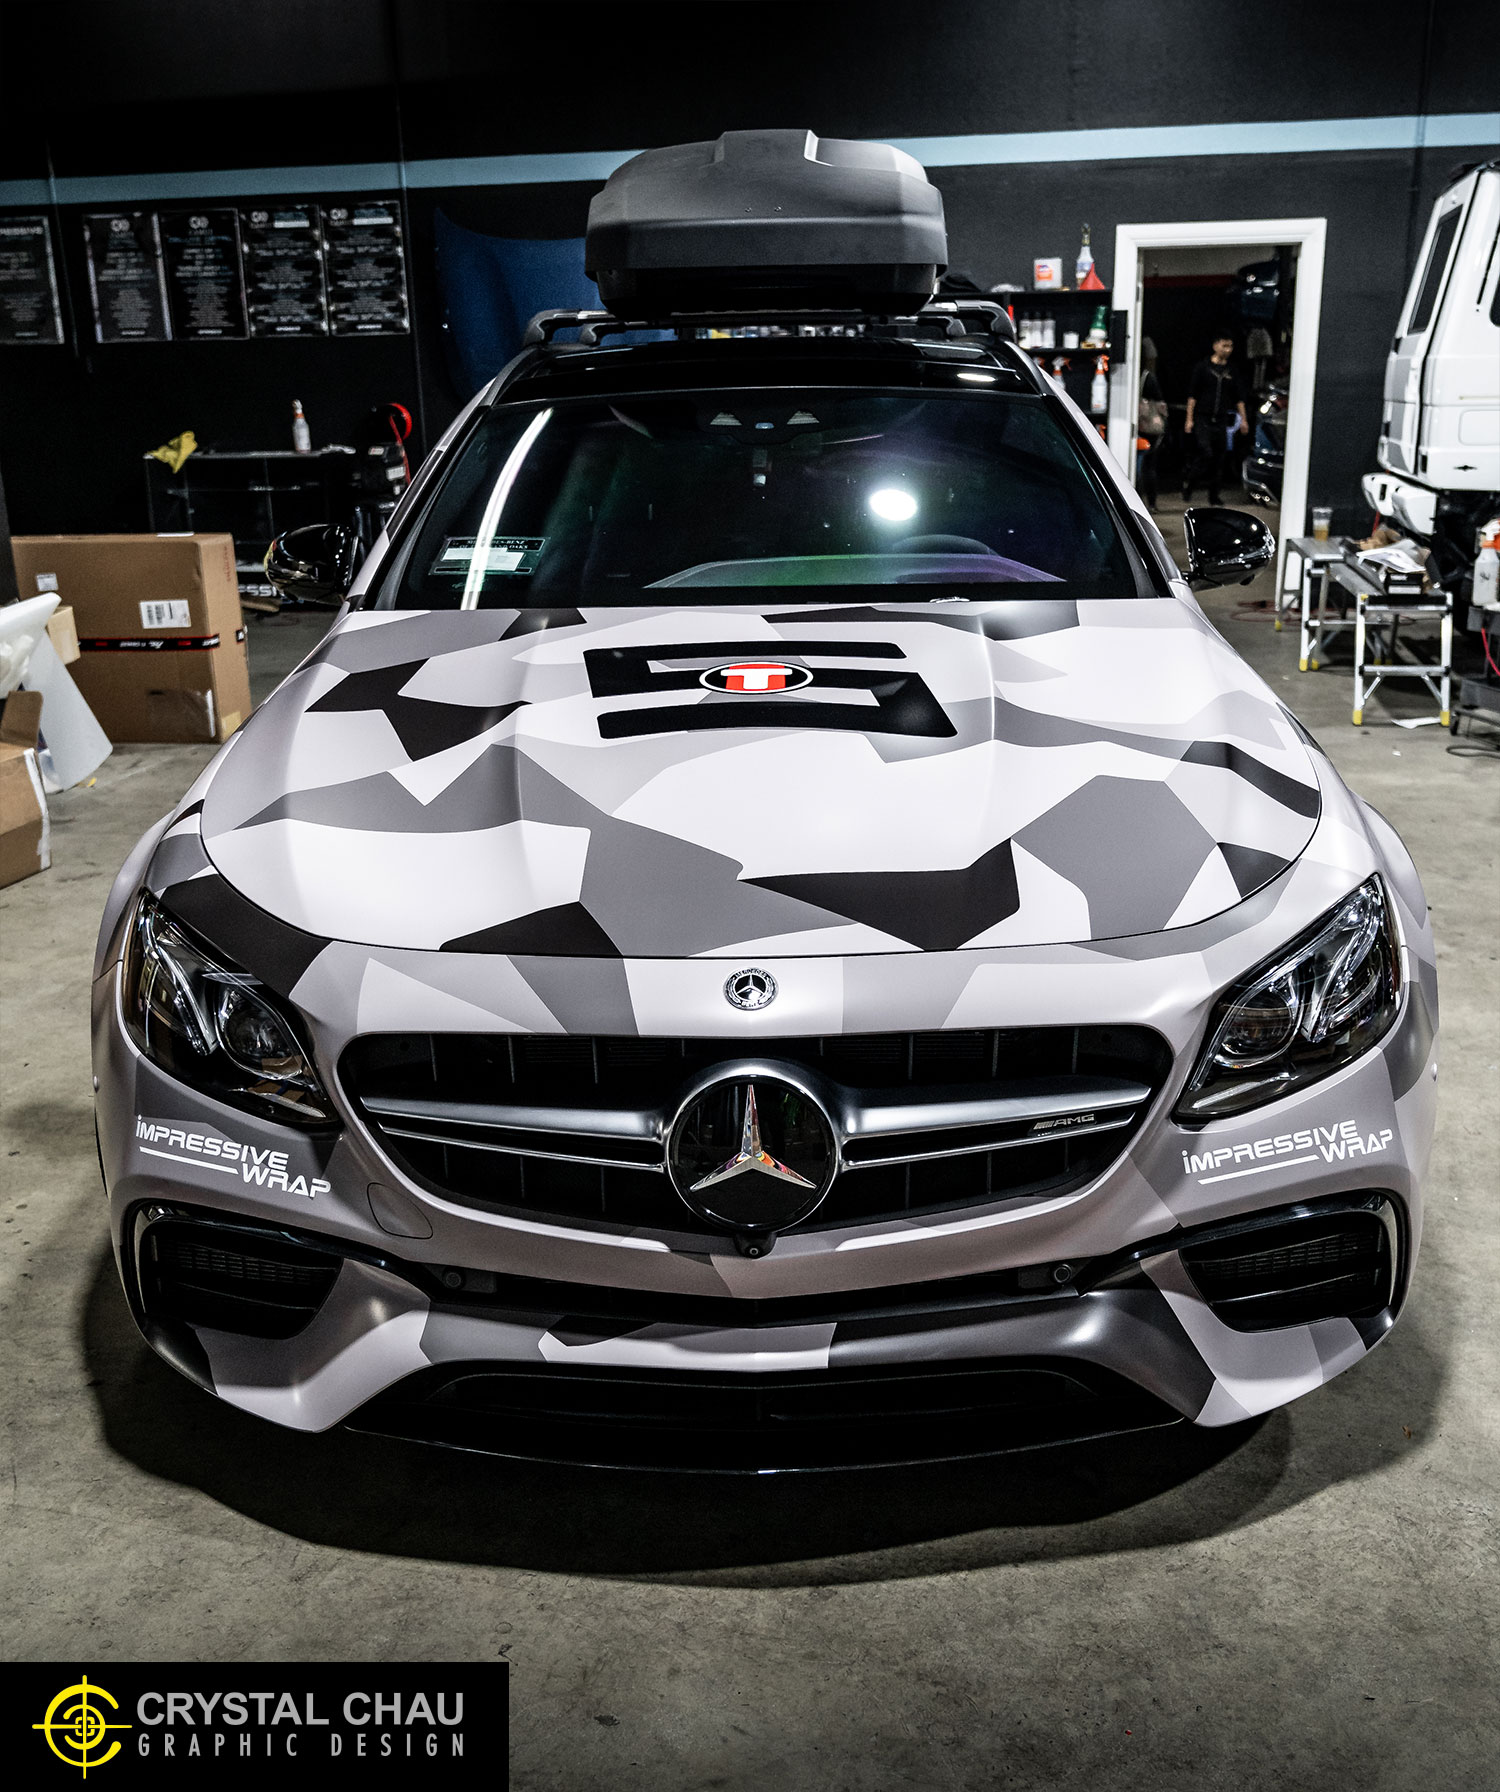 Mercedes E63s AMG Shattered Arctic Camouflage